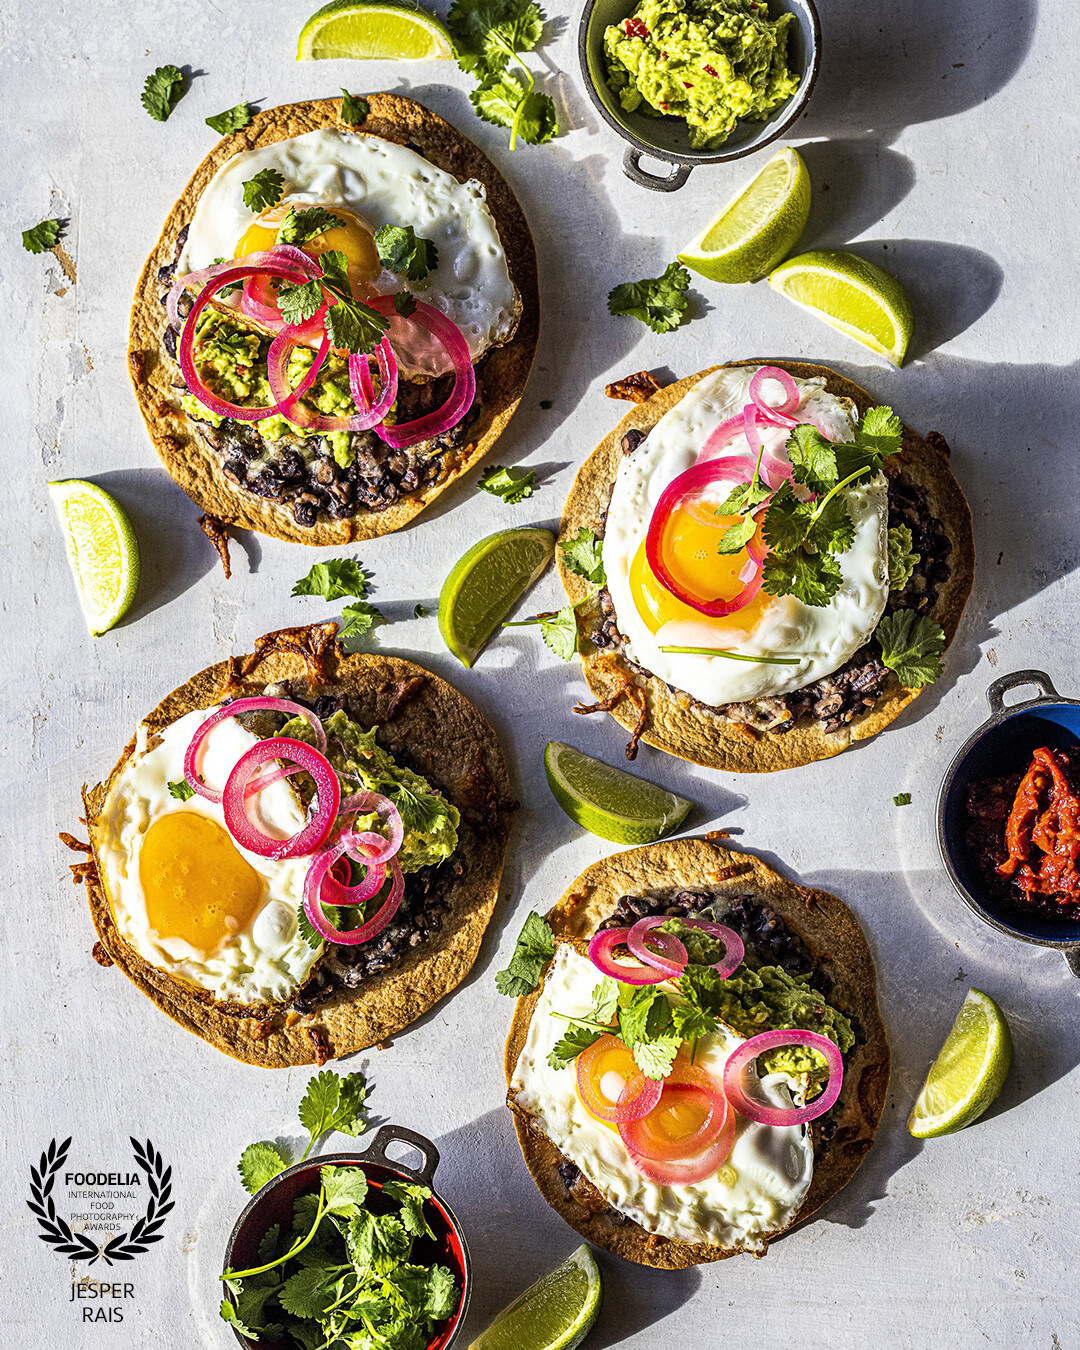 Tostadas with beans and fried egg. The food is cooked and styled by me, from my new own cookbook "SparMig!" with budget friendly food for times when everything costs a little extra.